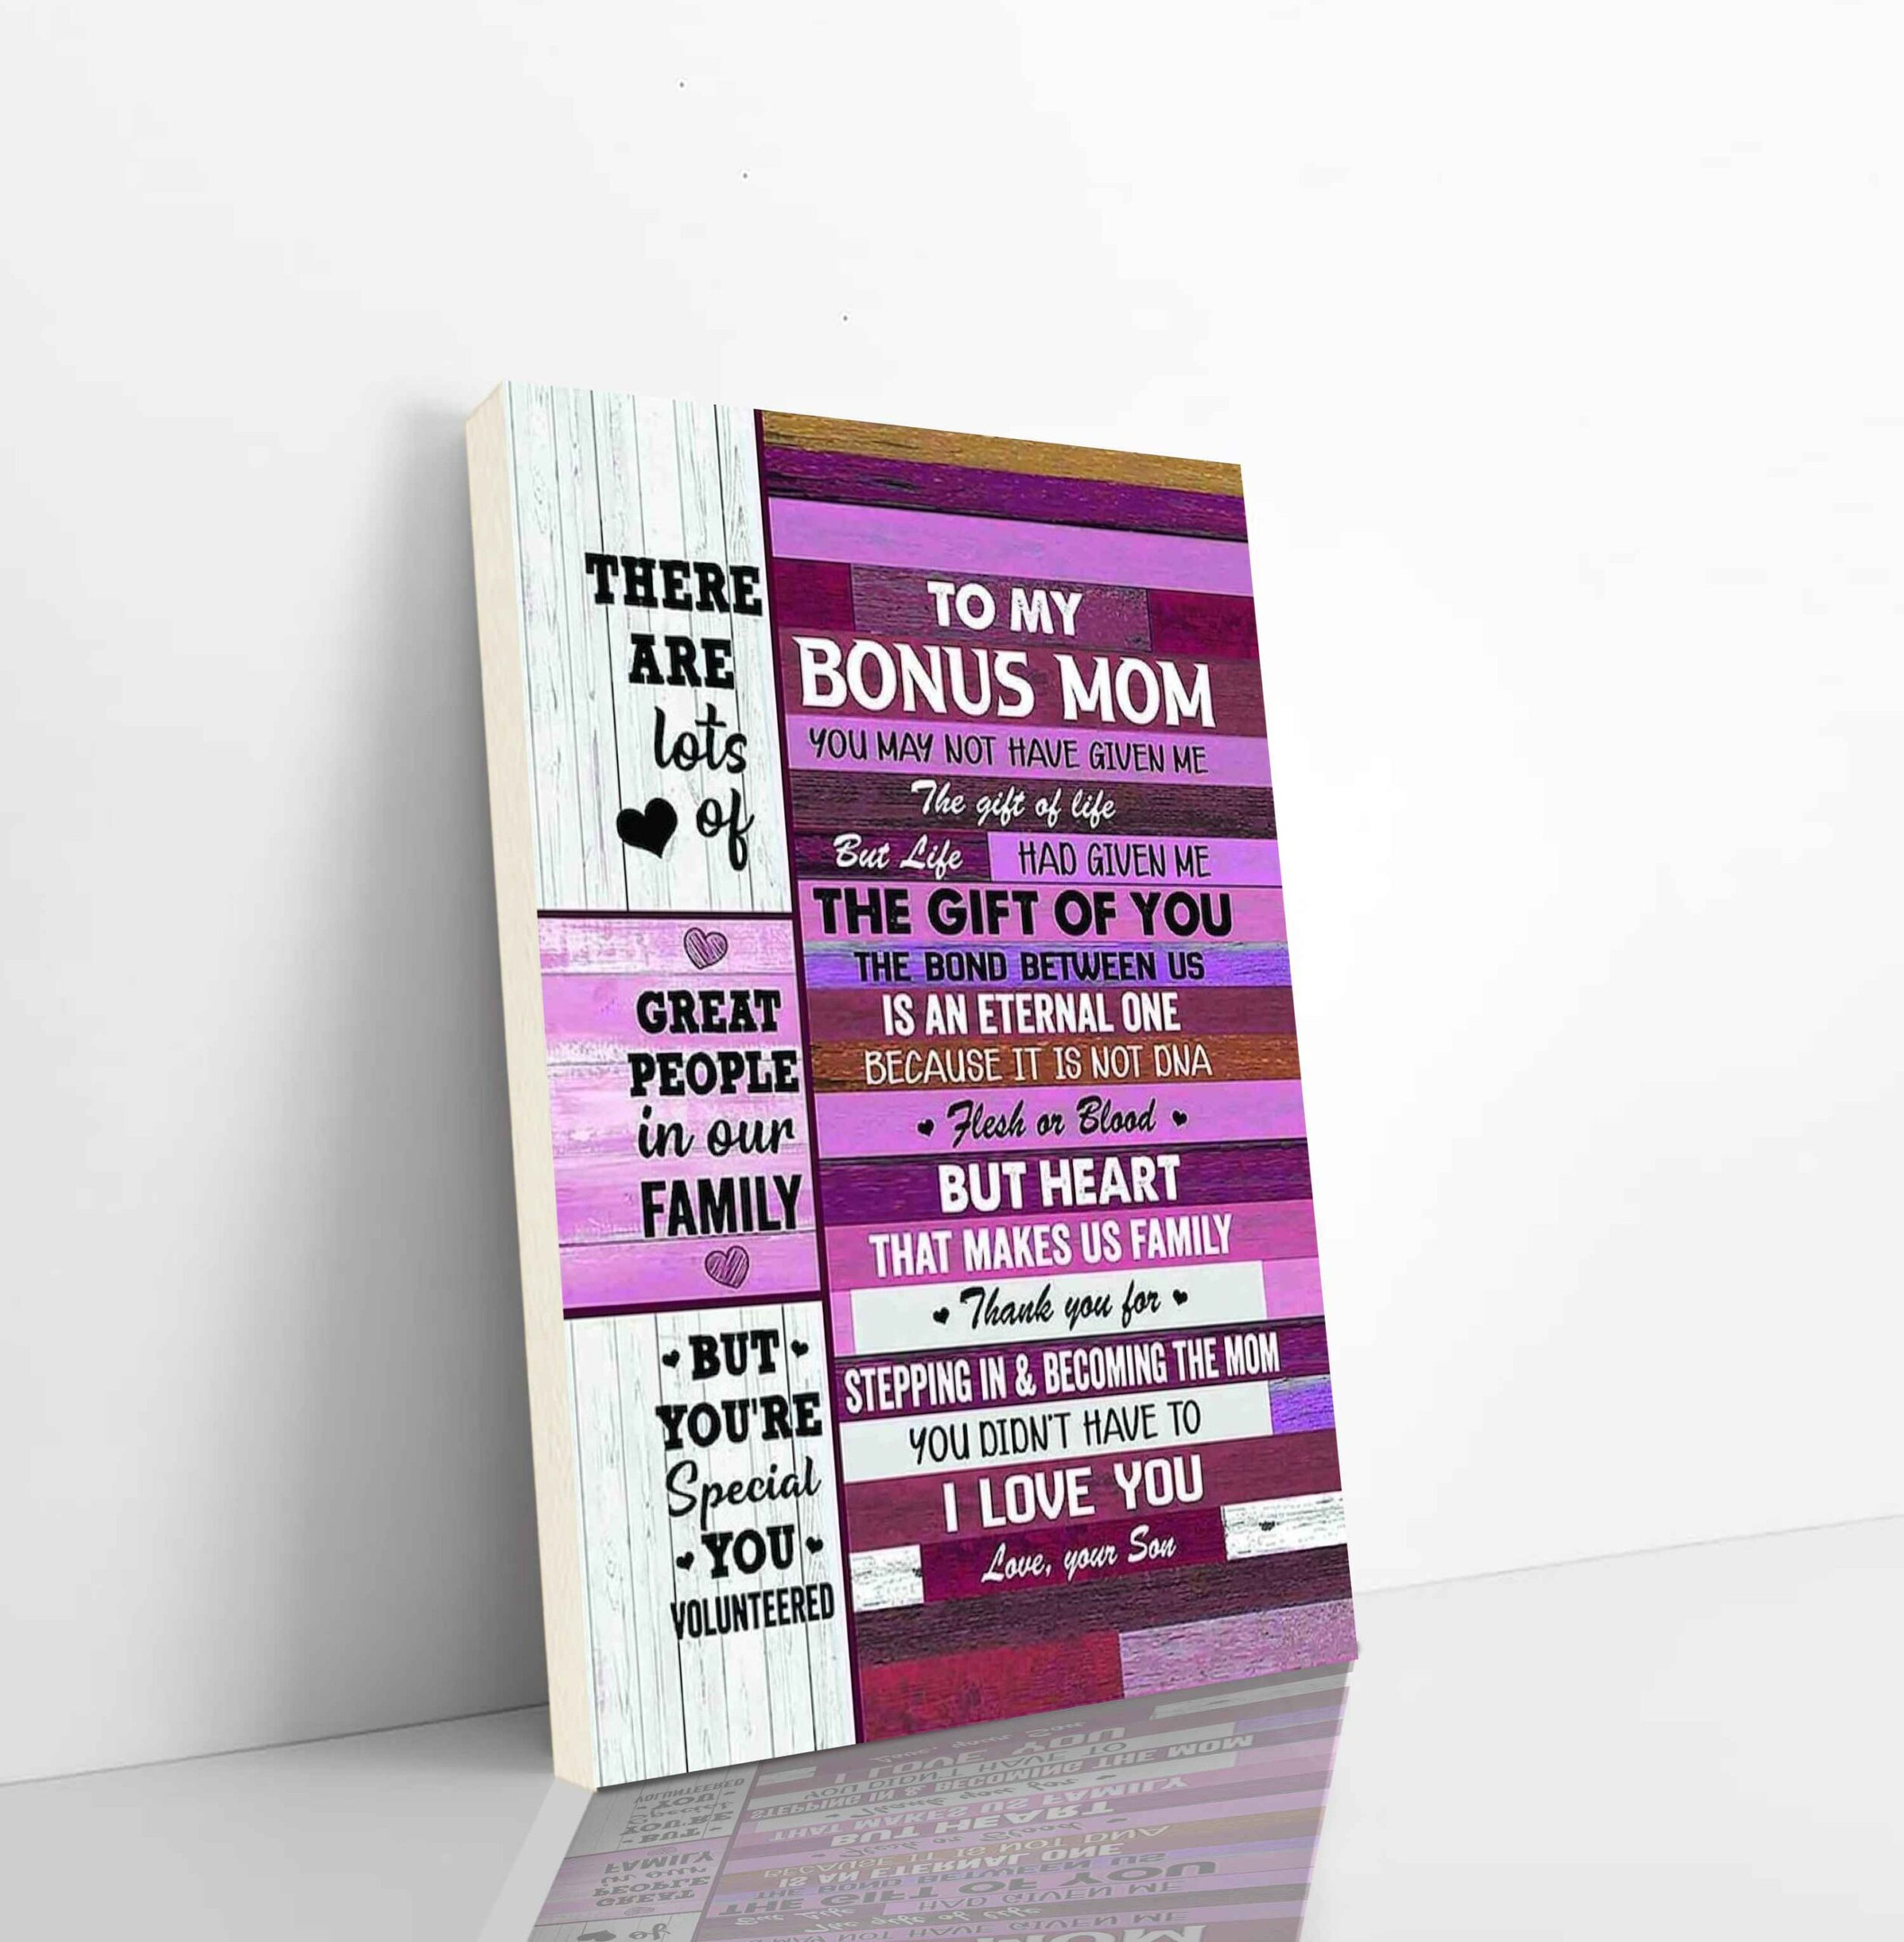 Family Canvas Canvas To My Bonus Mom There Are Lots Of Great People In Our Family You Are Special You Volunteered I Love You Love Your Son Vertical Canvas Dhg 2364 | PB Canvas